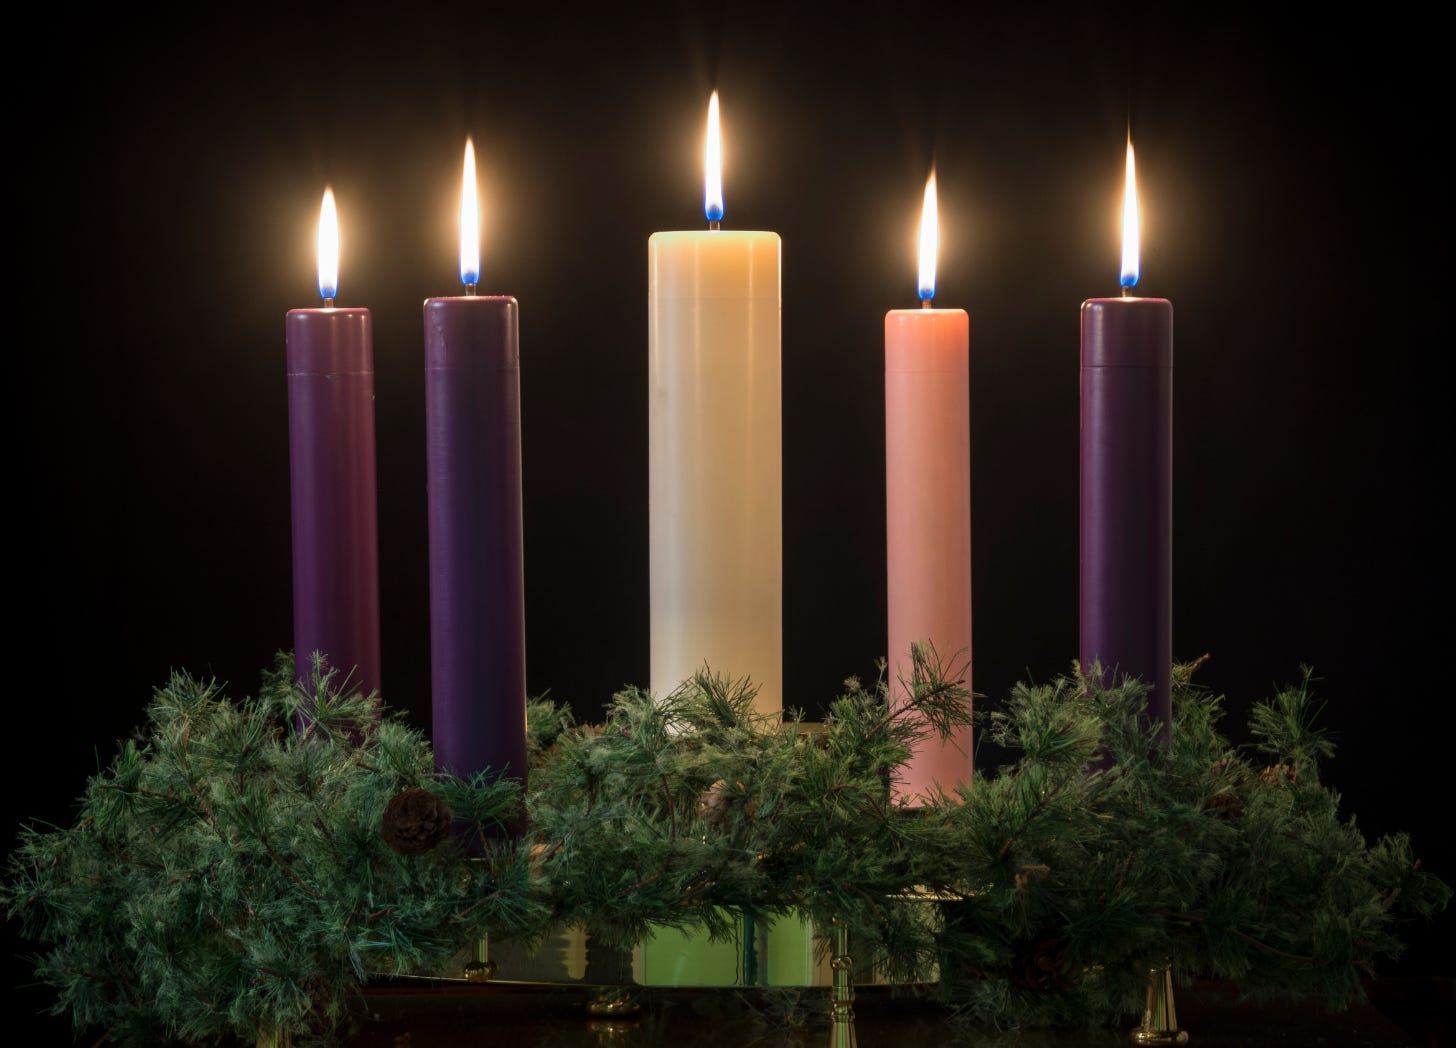 An Avent Wreath with three purple, one pink, and one white candle, plus evergreens